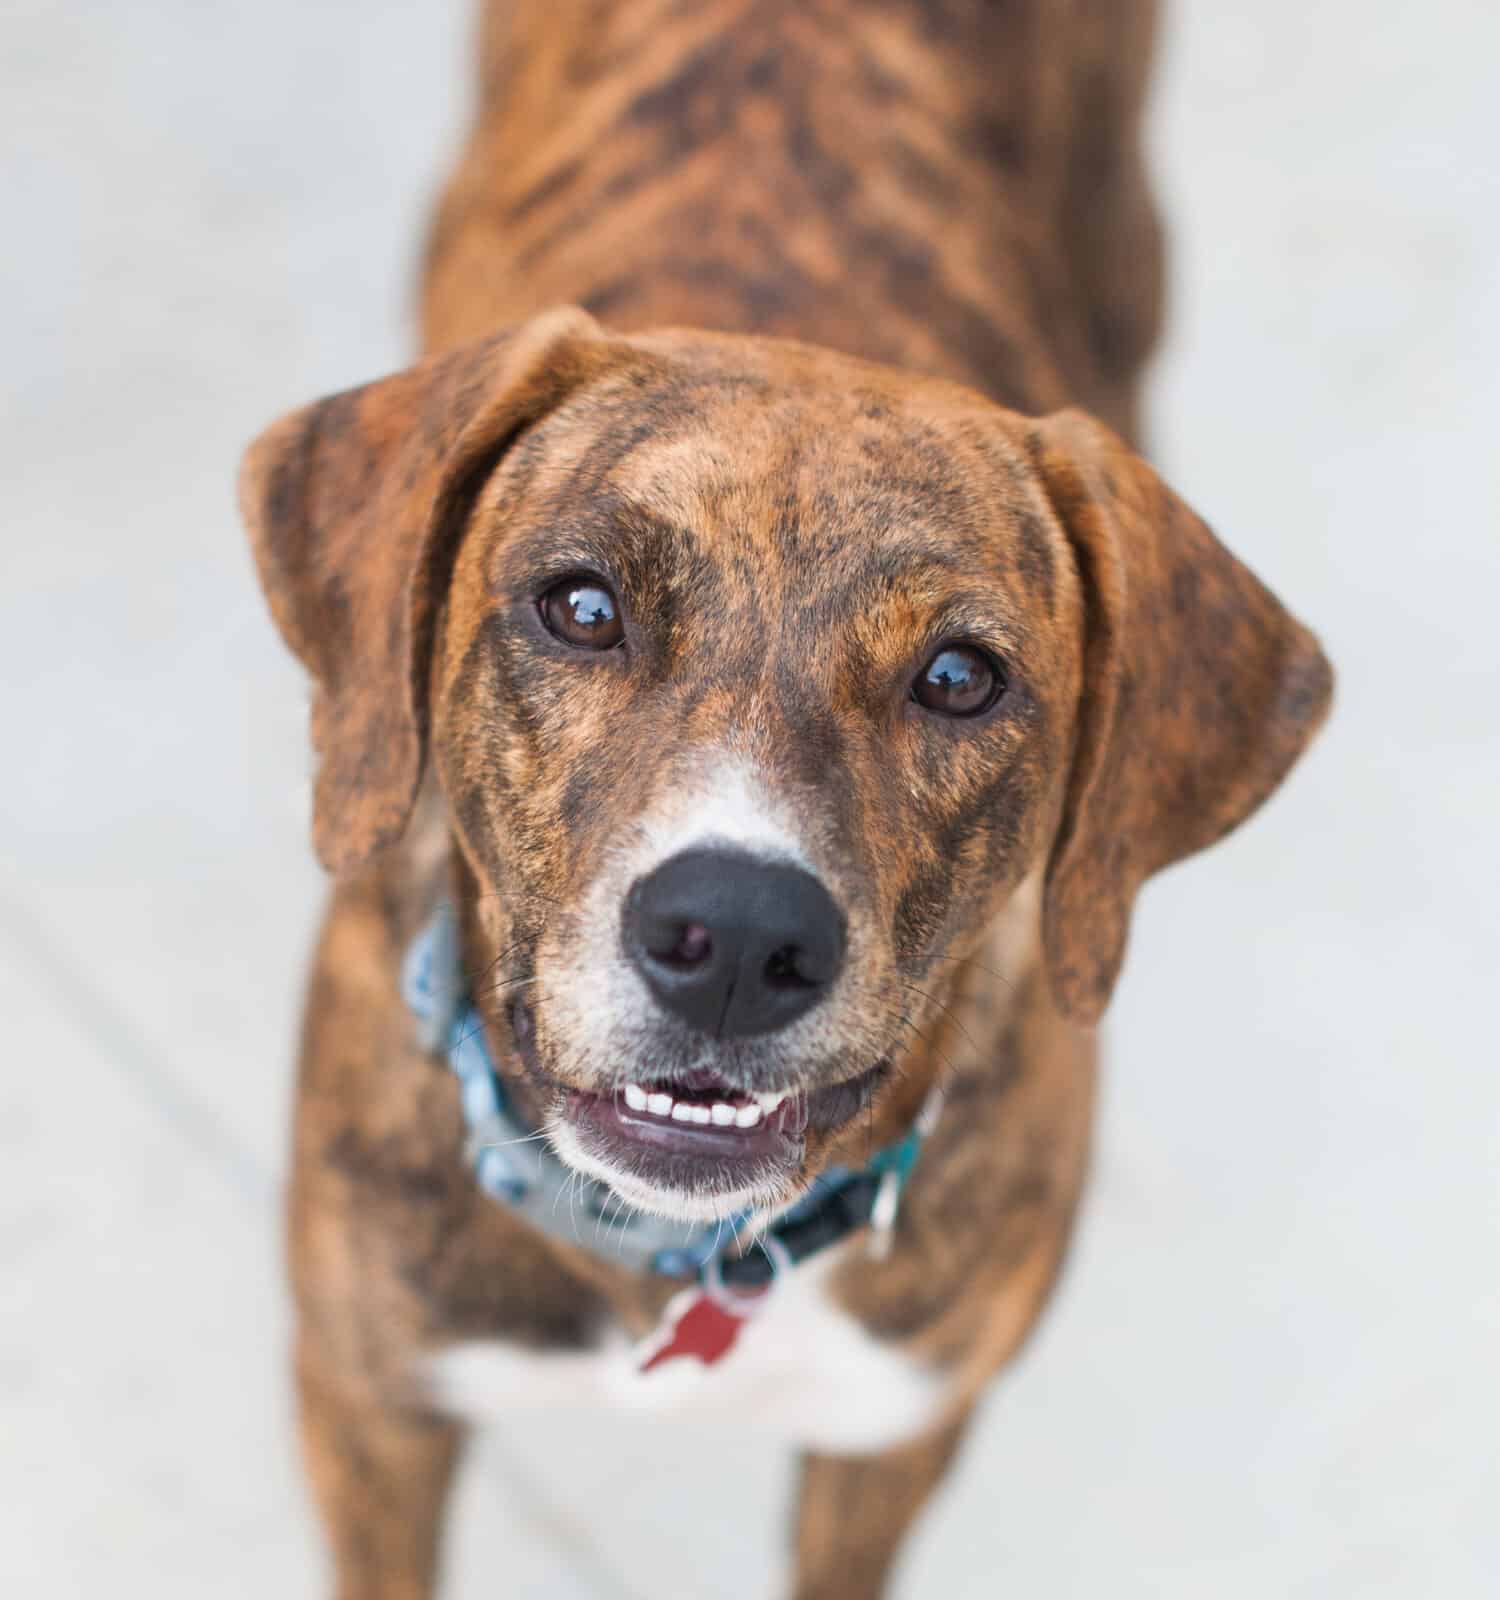 Large Brindle and white beagle pit bull mixed breed Rescue Dog with white chin and white chest wearing blue collar looking up at camera with white socks